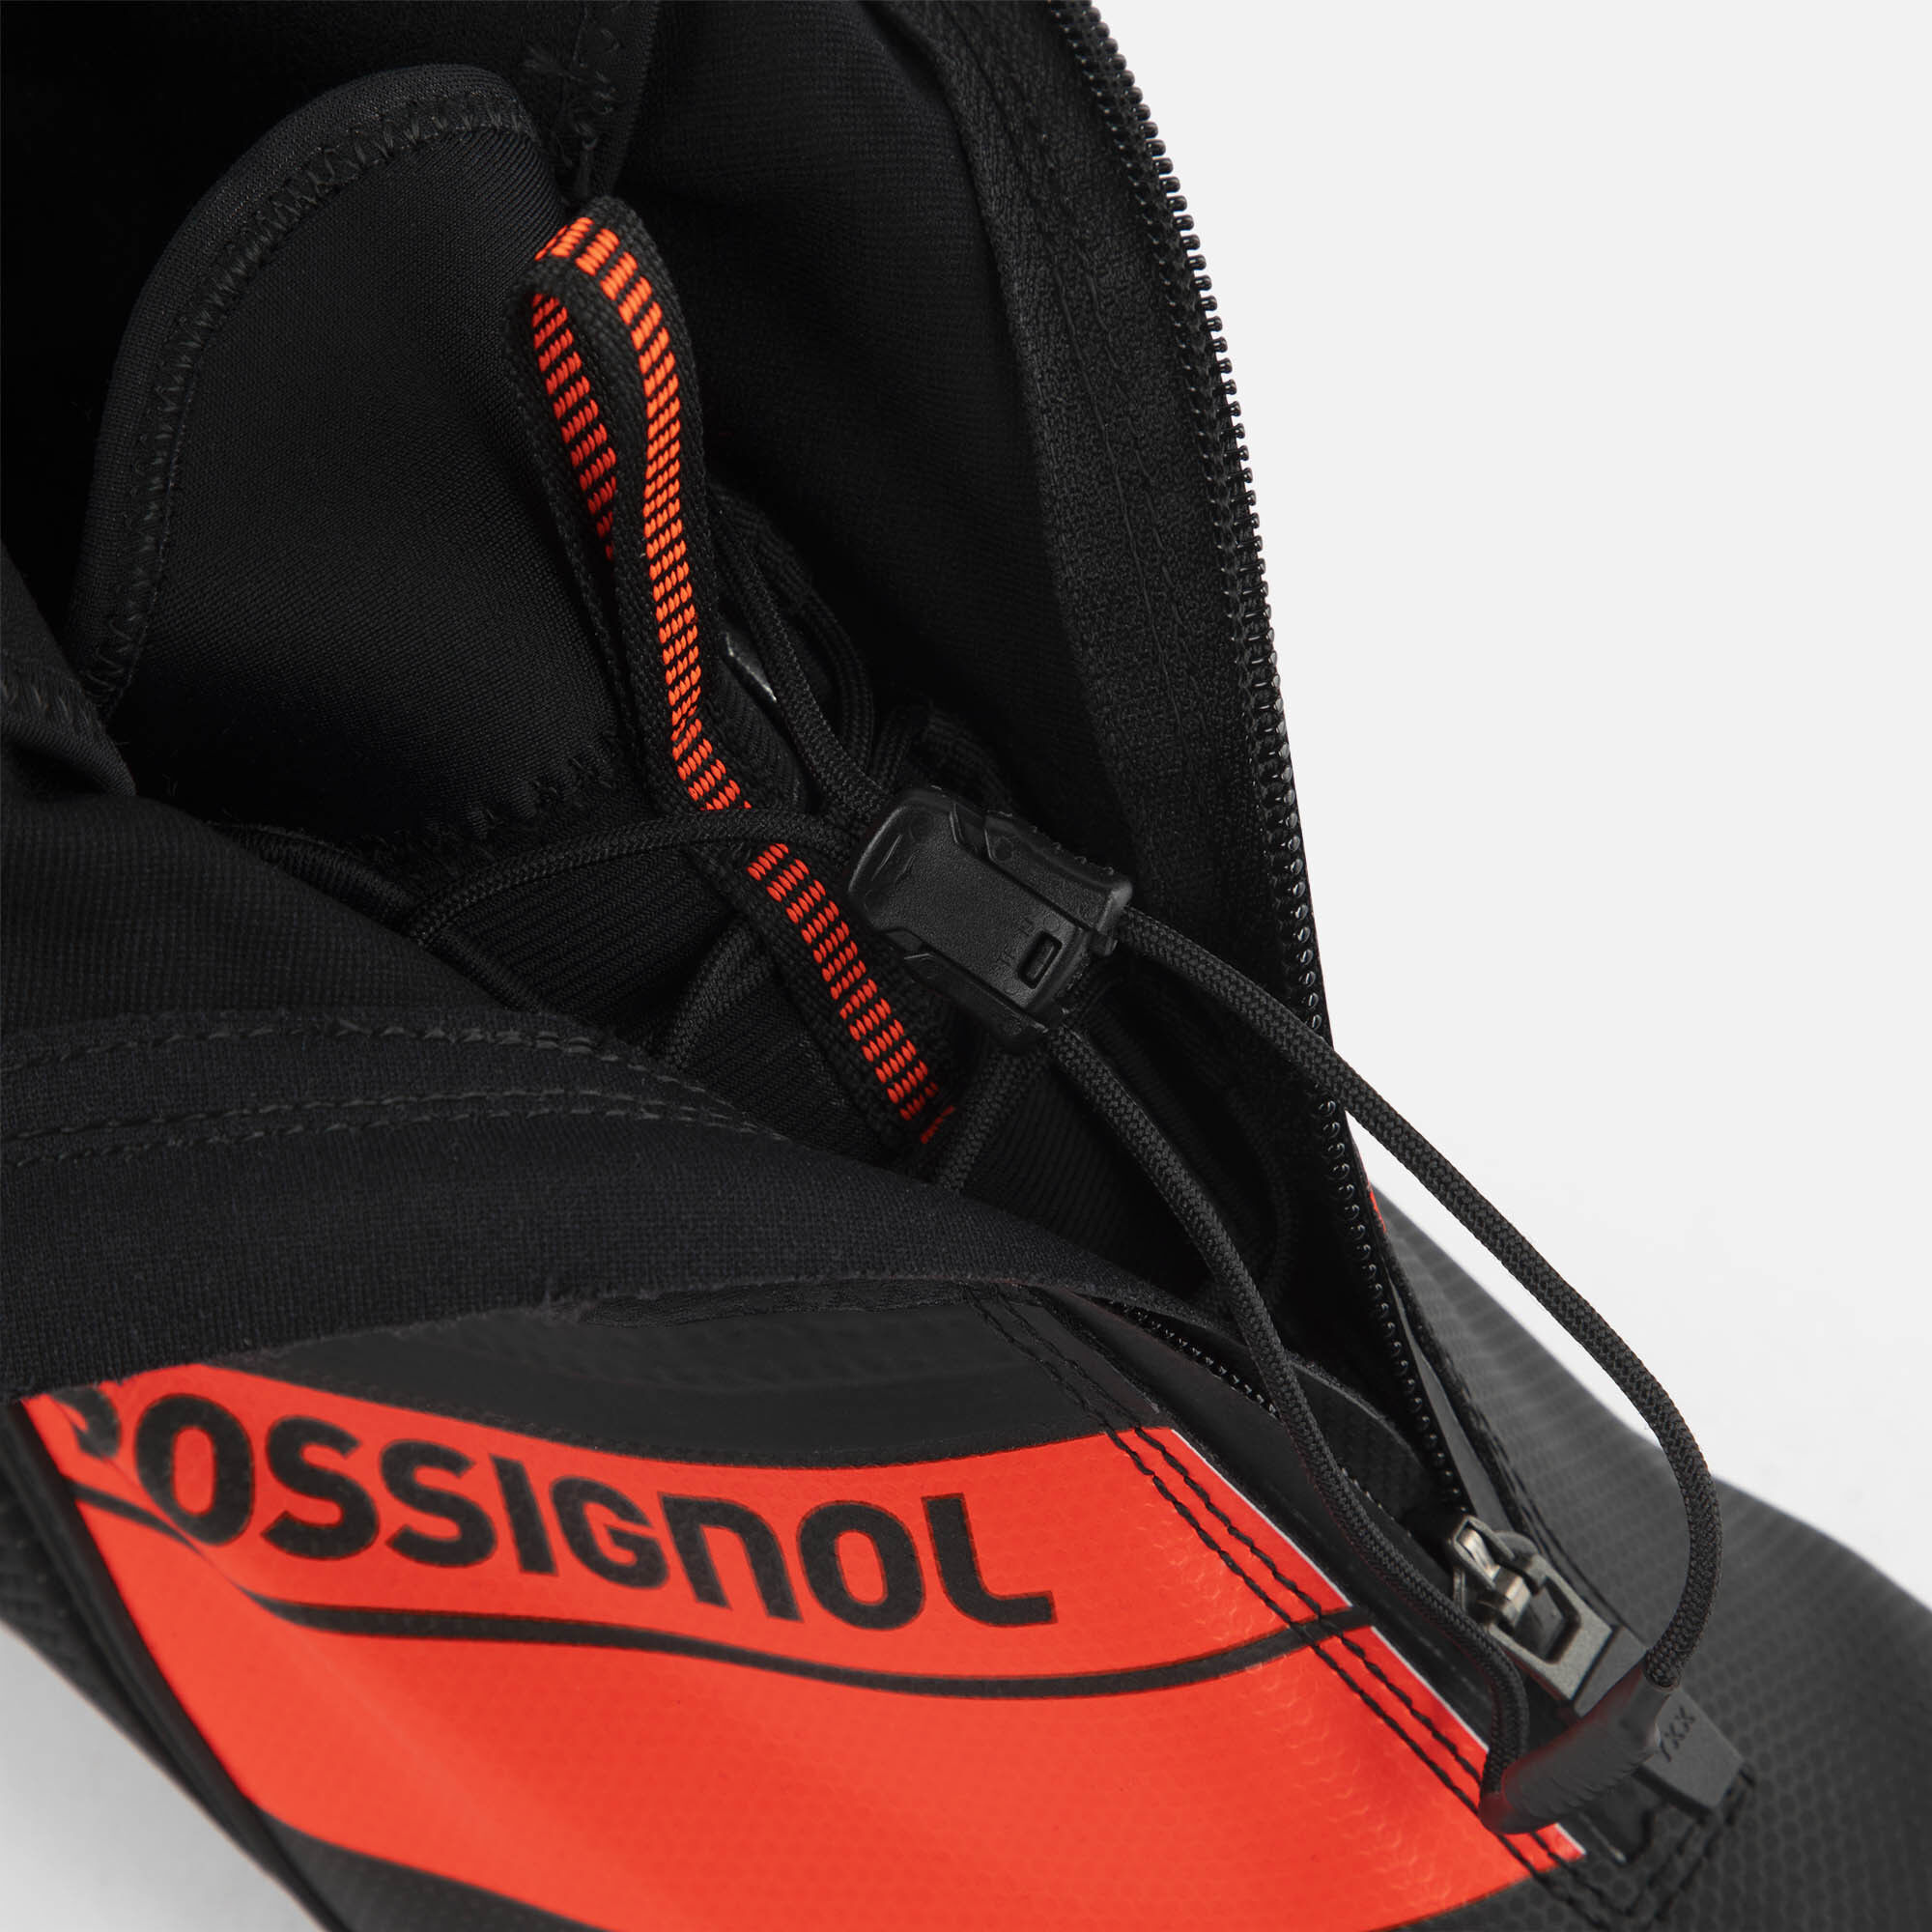 Unisex Race Skate Nordic Boots X-10 | Skating | Rossignol